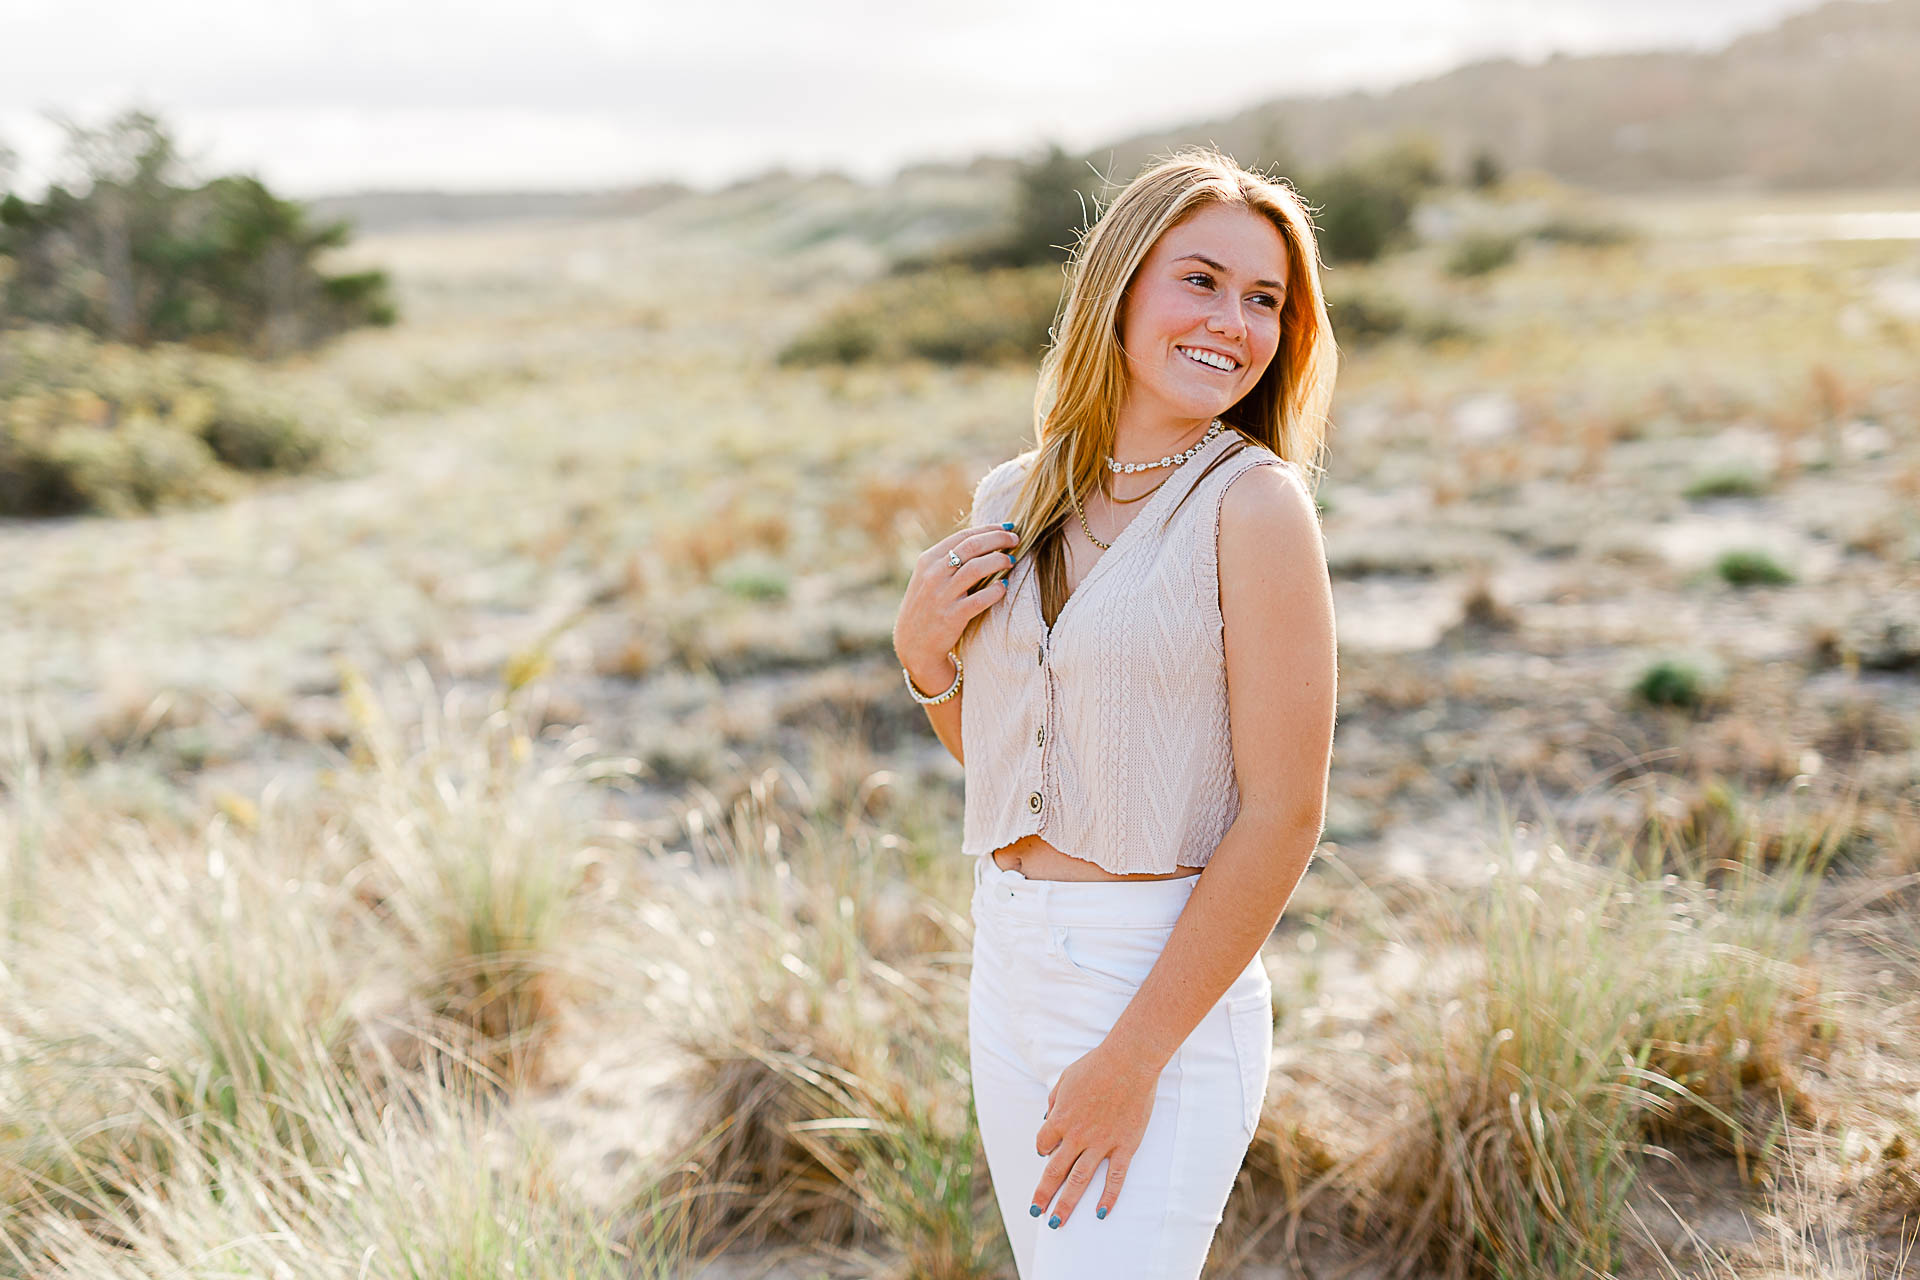 Photo of Caroline's Thayer Academy Senior Pictures by Christina Runnals Photography | Girl smiling in beach grass 